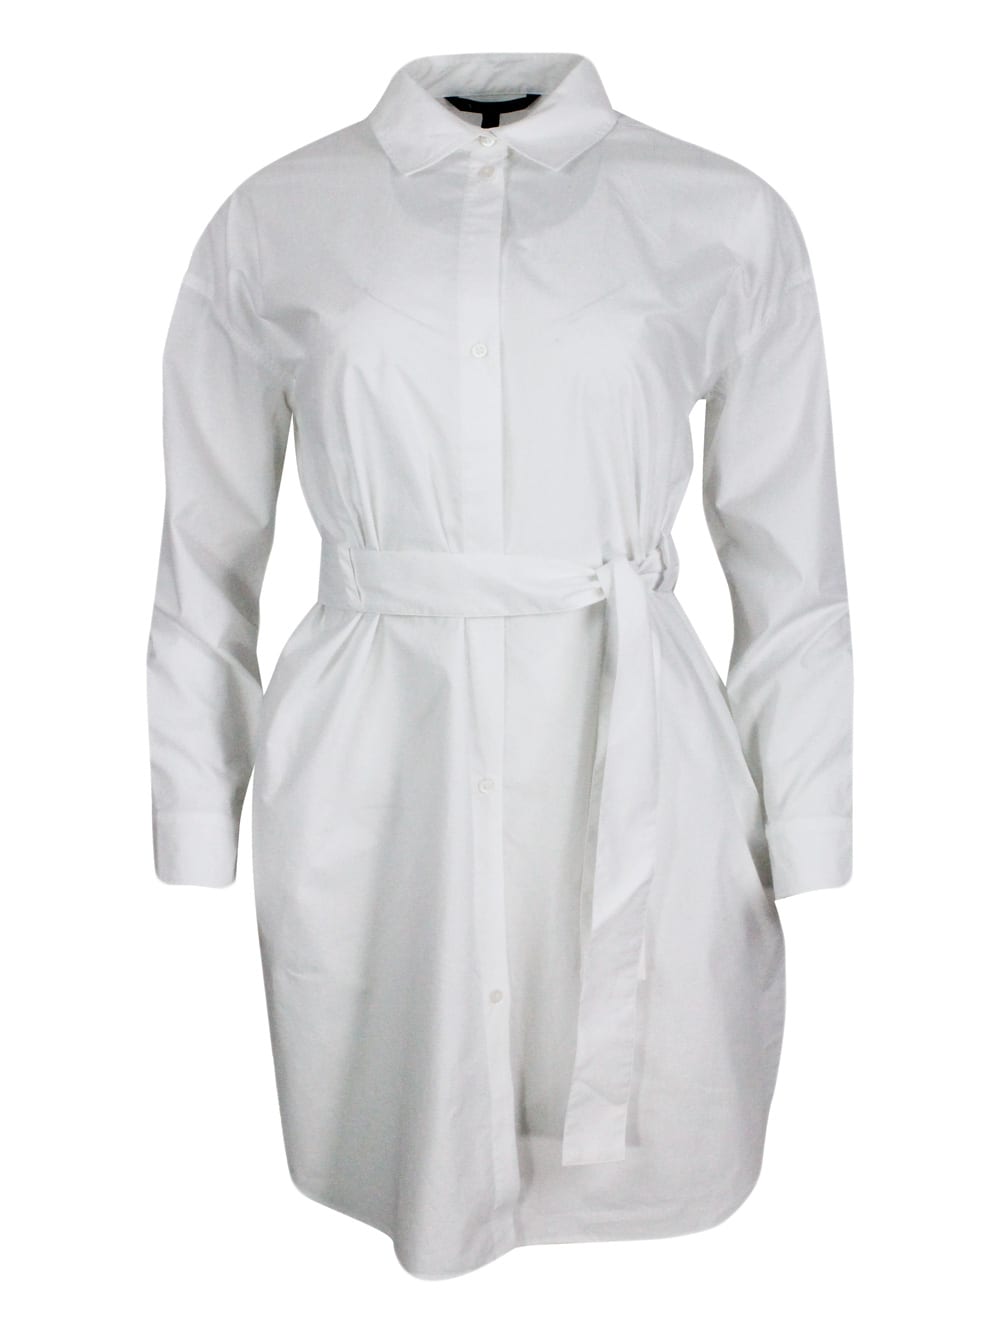 Armani Collezioni Dress Made Of Soft Cotton With Long Sleeves, With Button Closure On The Front And Belt. In White